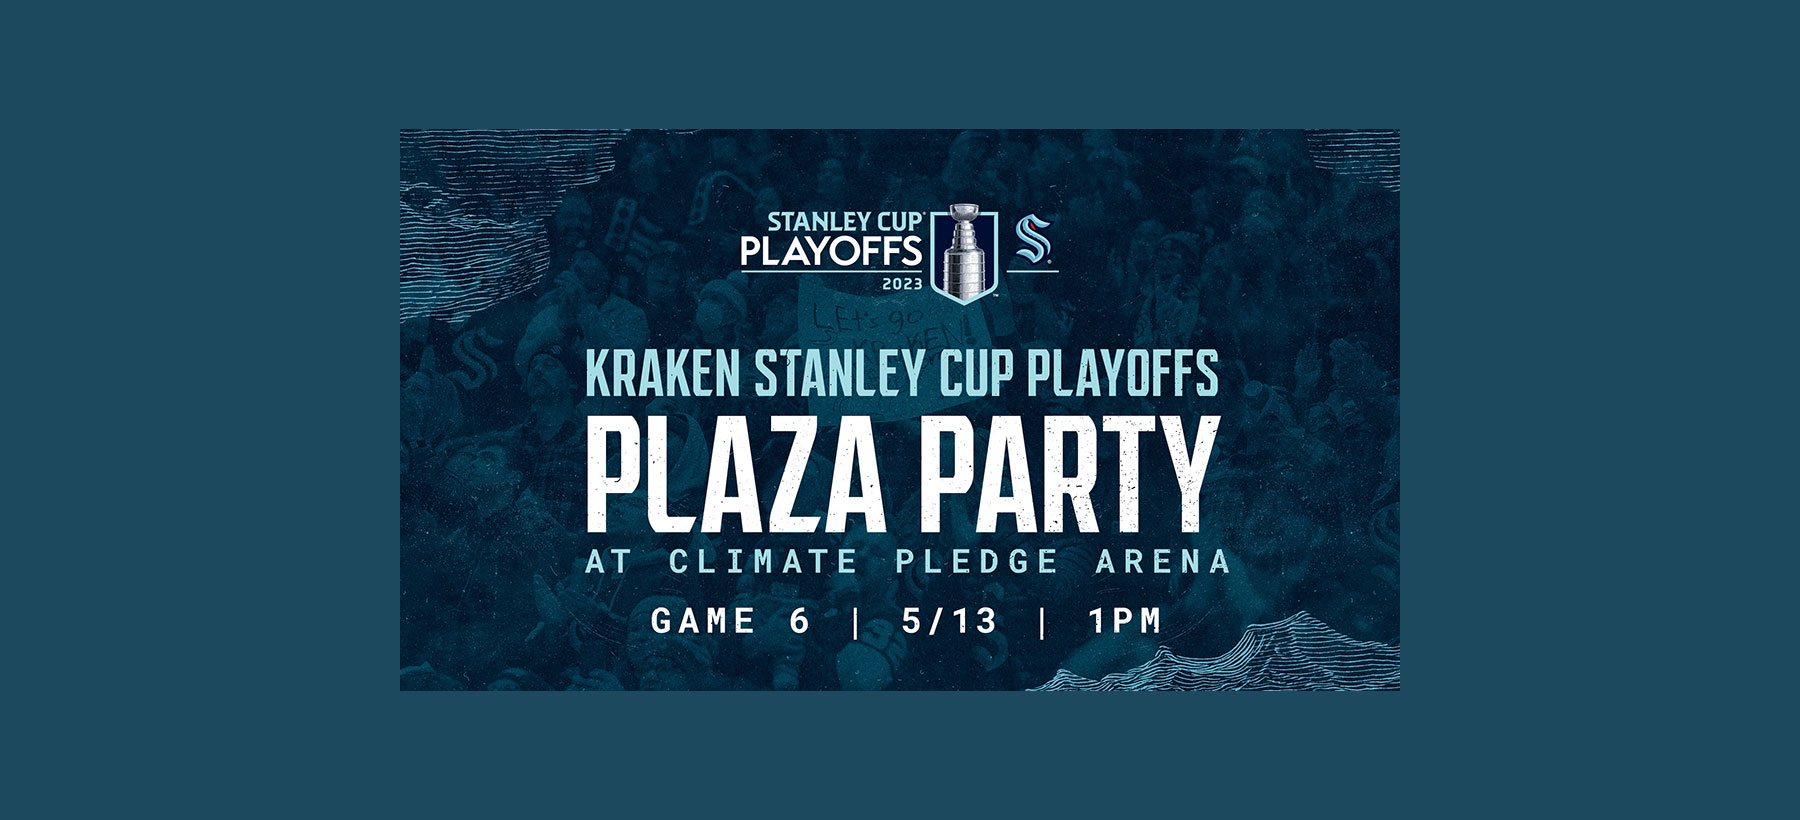 Photos: Game 5 watch party for Kraken fans at Climate Pledge Arena